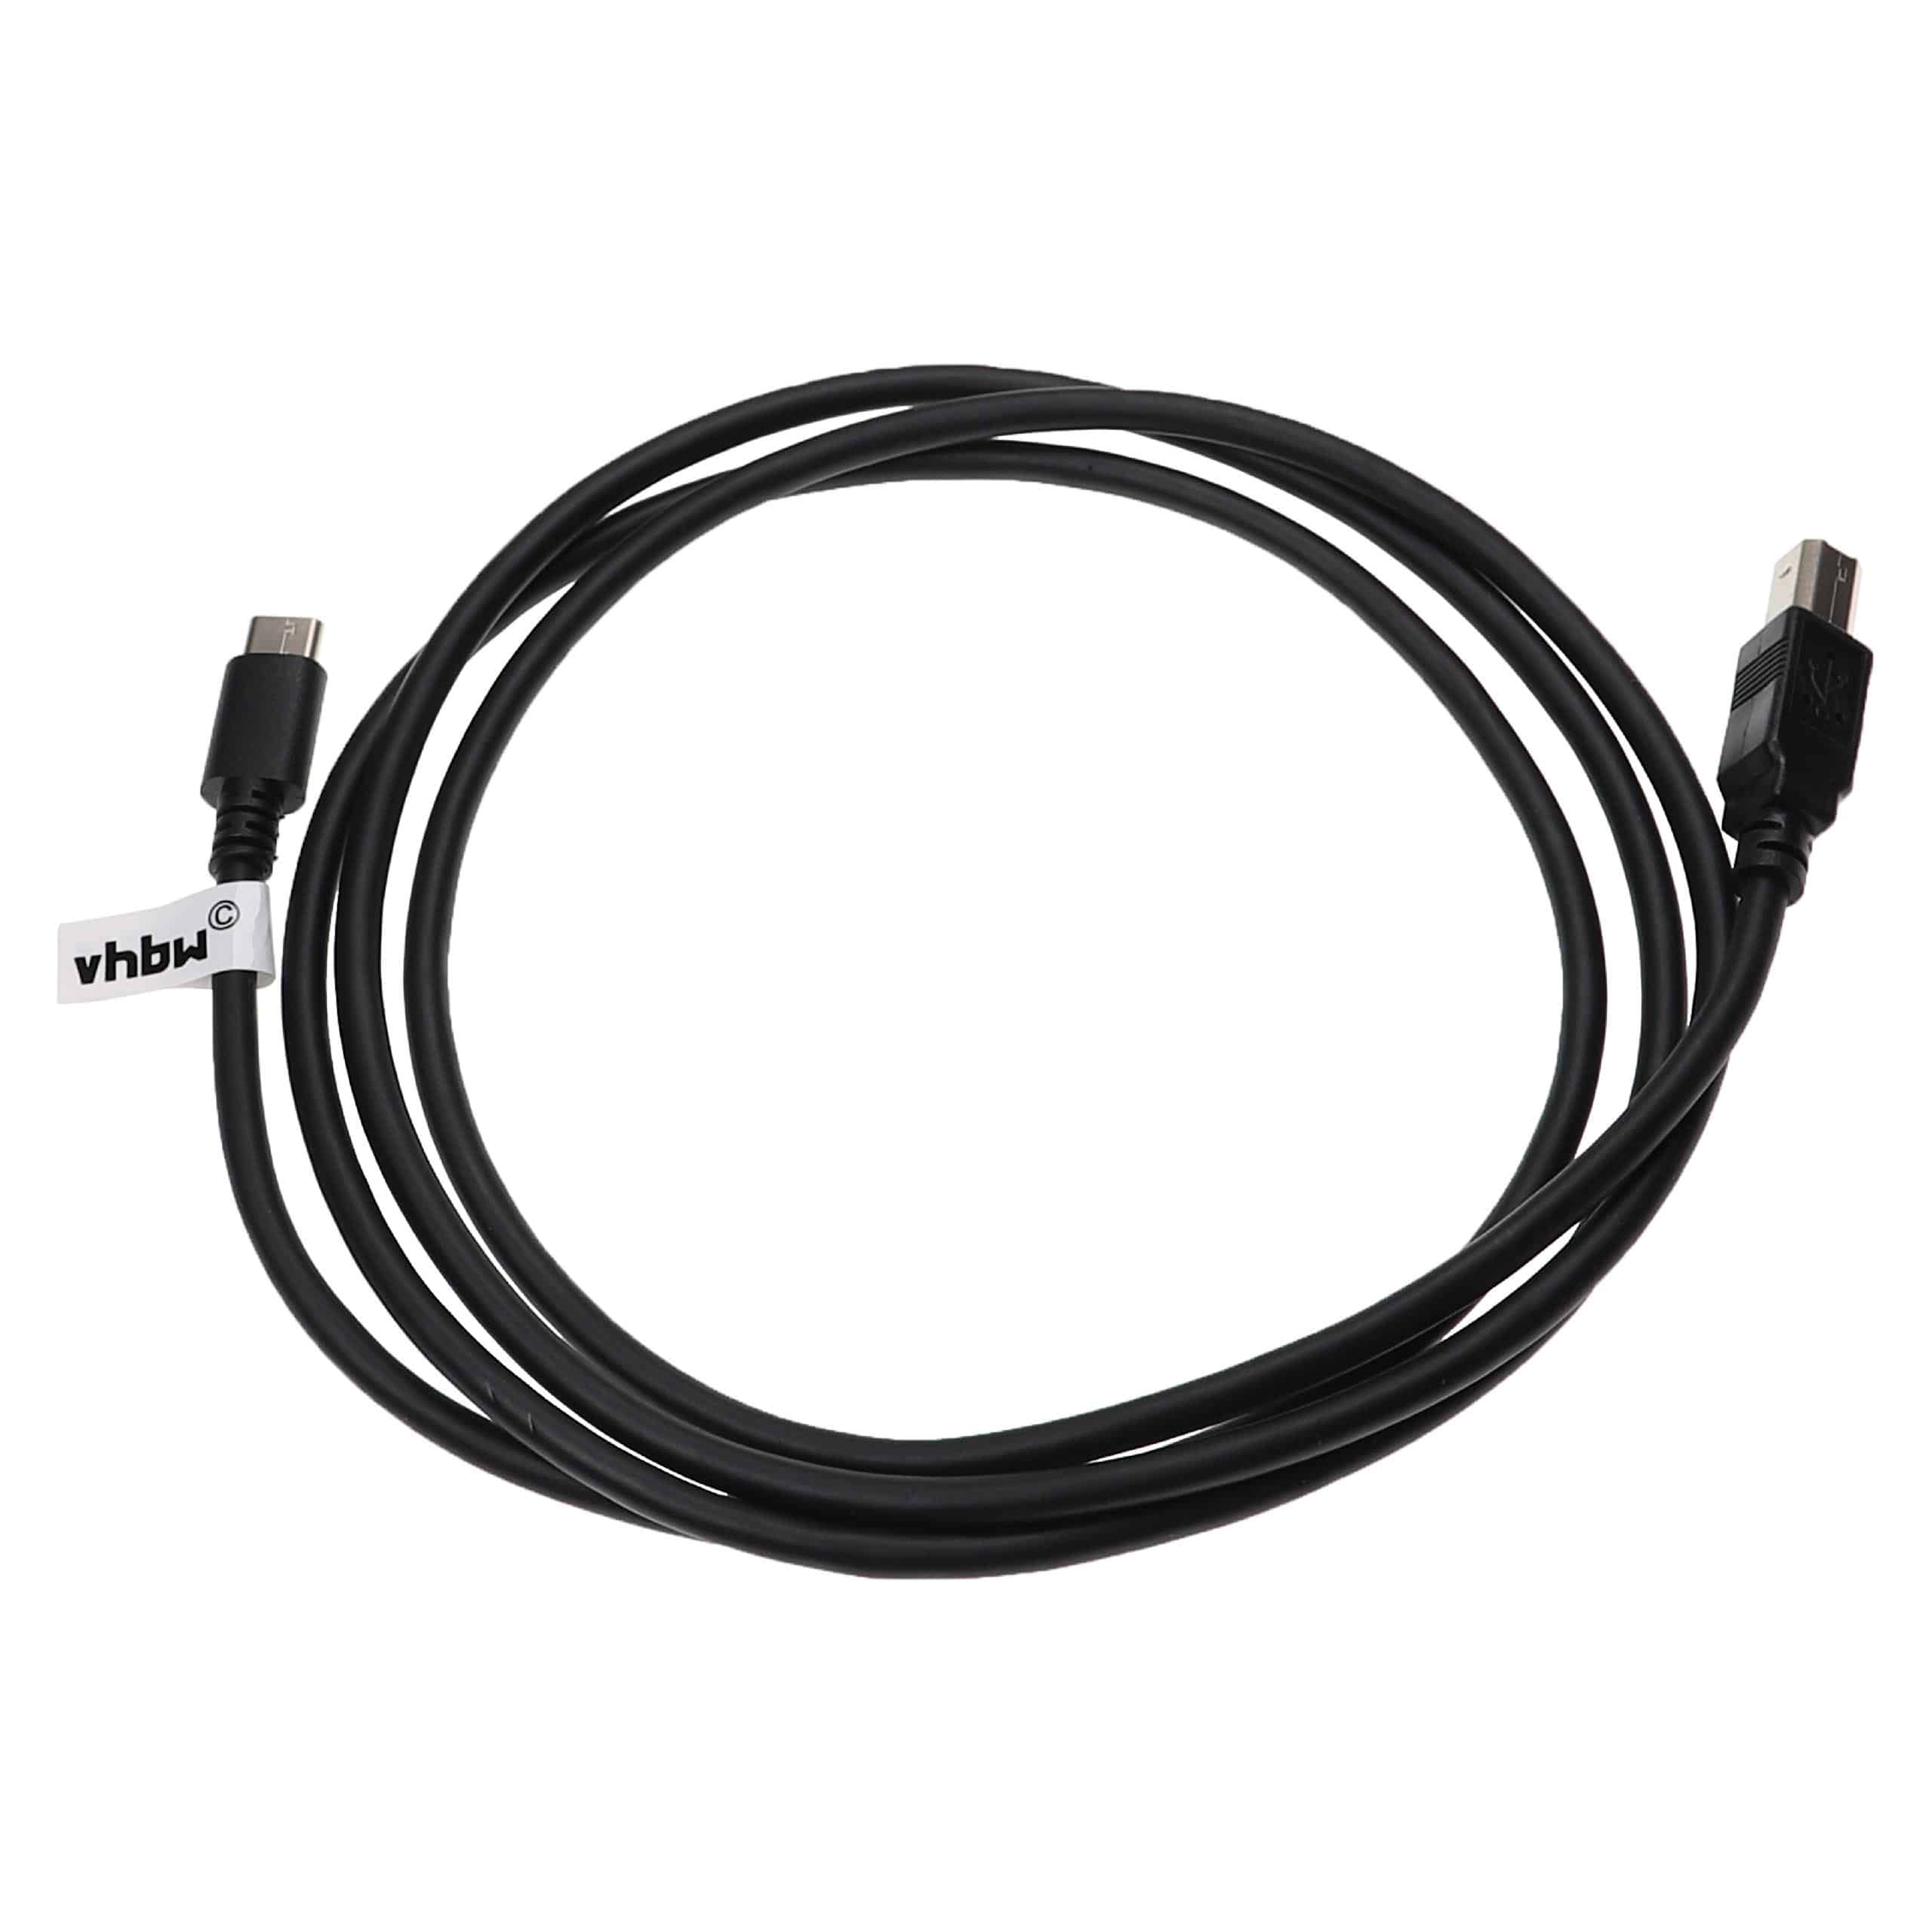 USB C to USB B Adapter Cable for Printer, Scanner, Fax Machine - USB Connection Cable